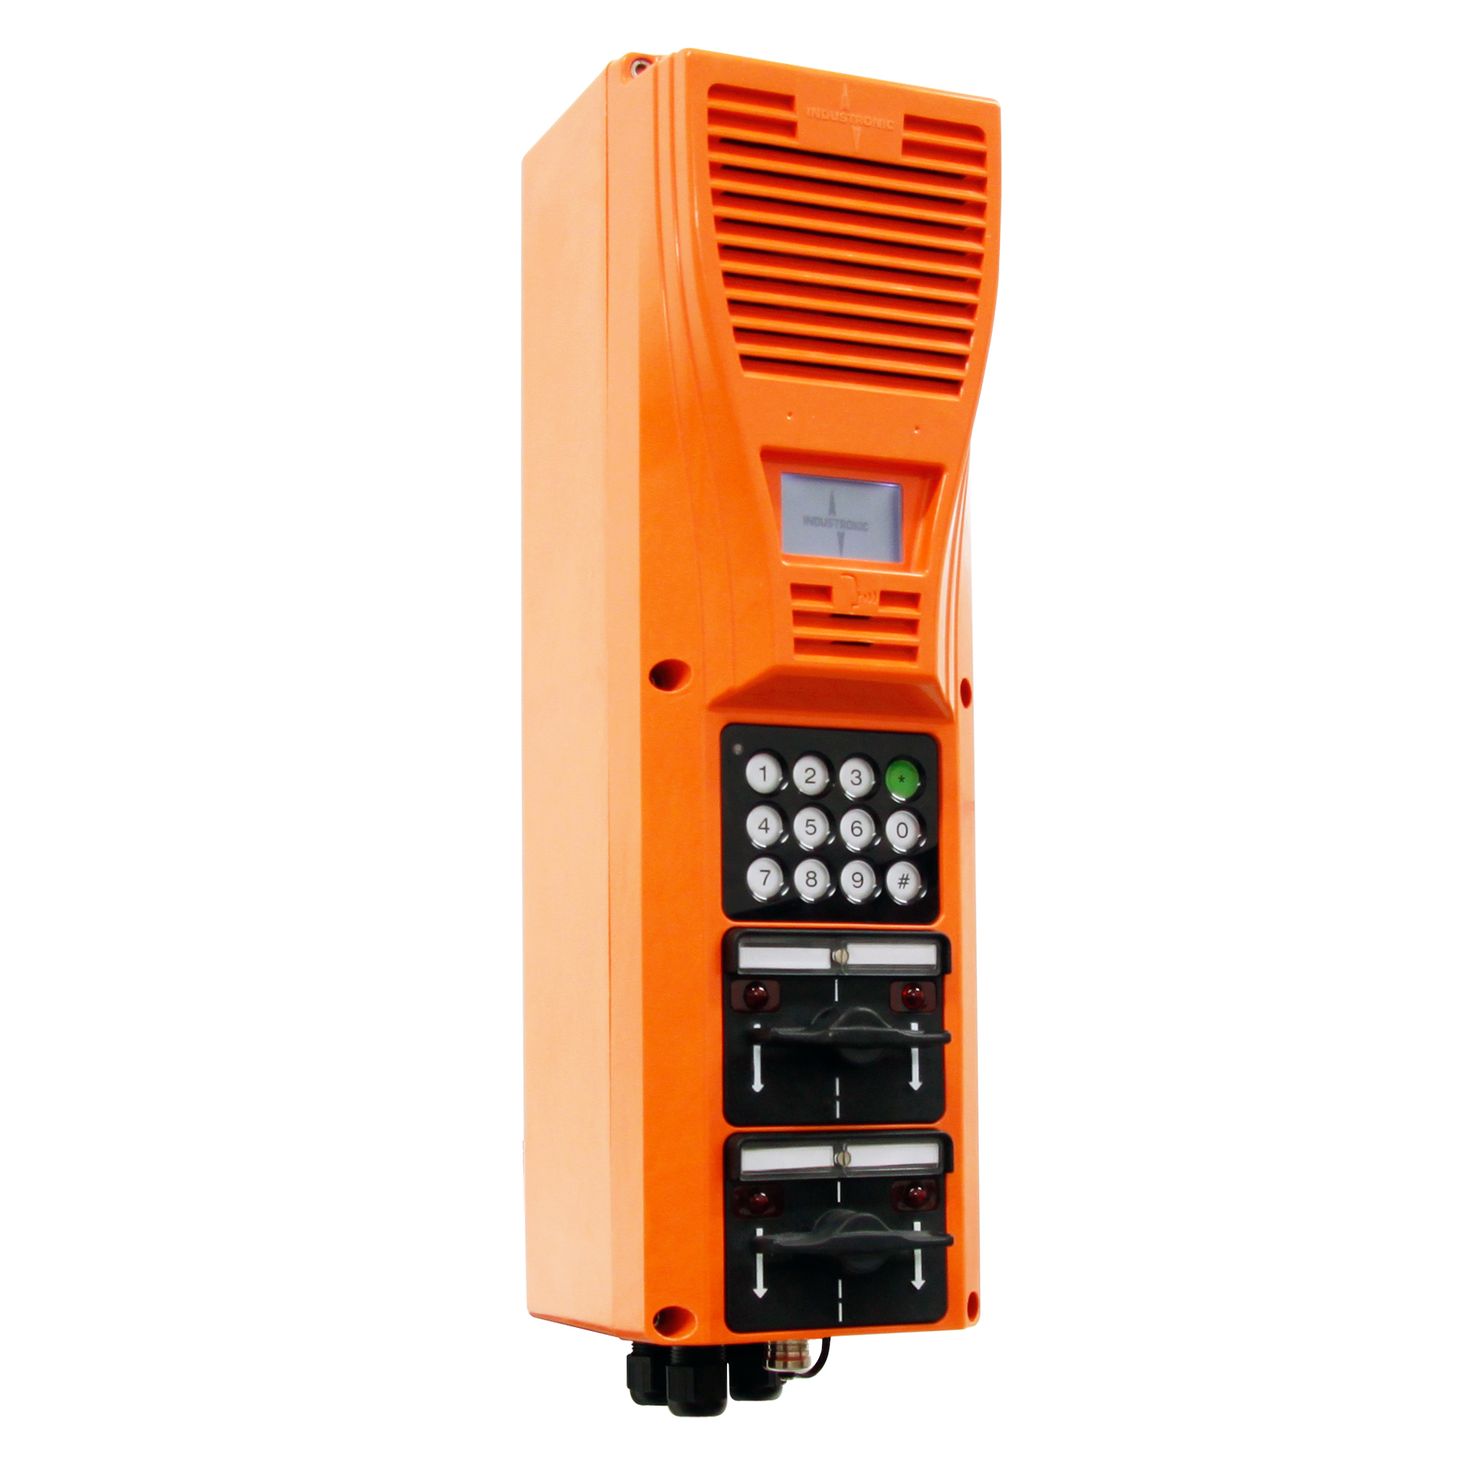 The weather-proof IP outdoor (harsh environment) intercom stations of the NRO xx/DE series with integrated dial keypad are part of the INTRON-D plus communication and public address system from INDUSTRONIC.